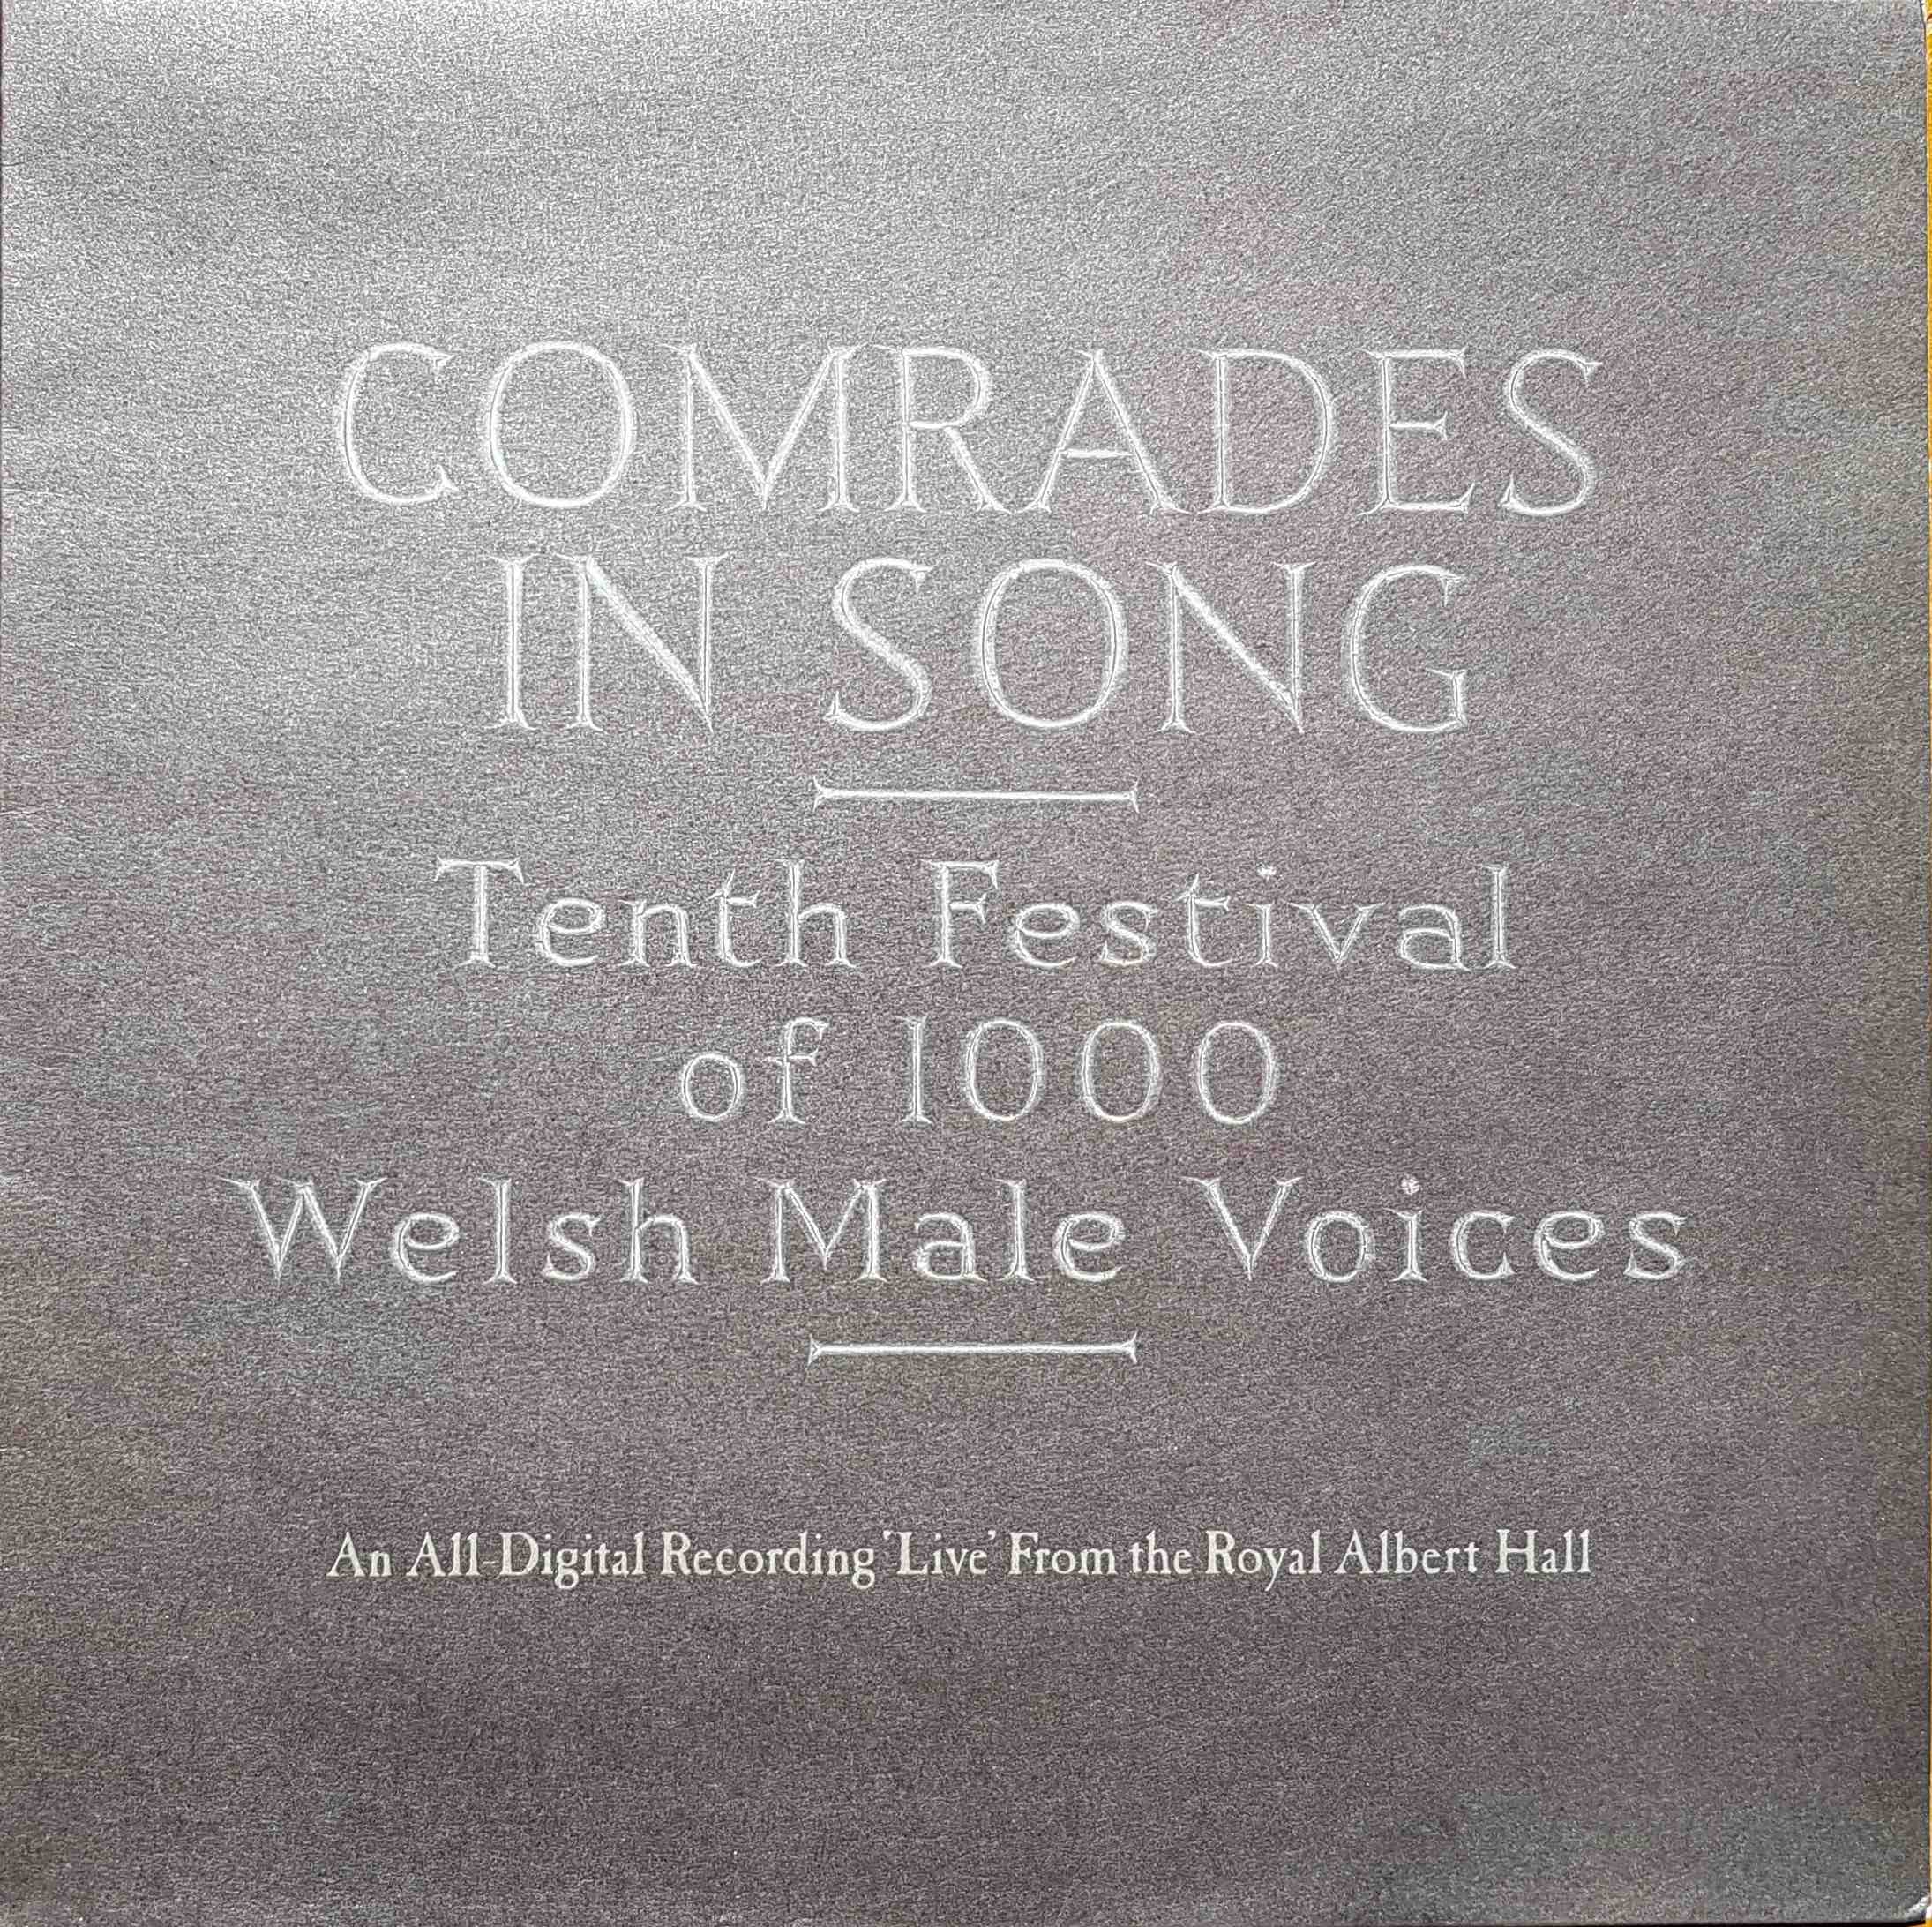 Picture of REH 630 Comrades in song by artist Various from the BBC records and Tapes library